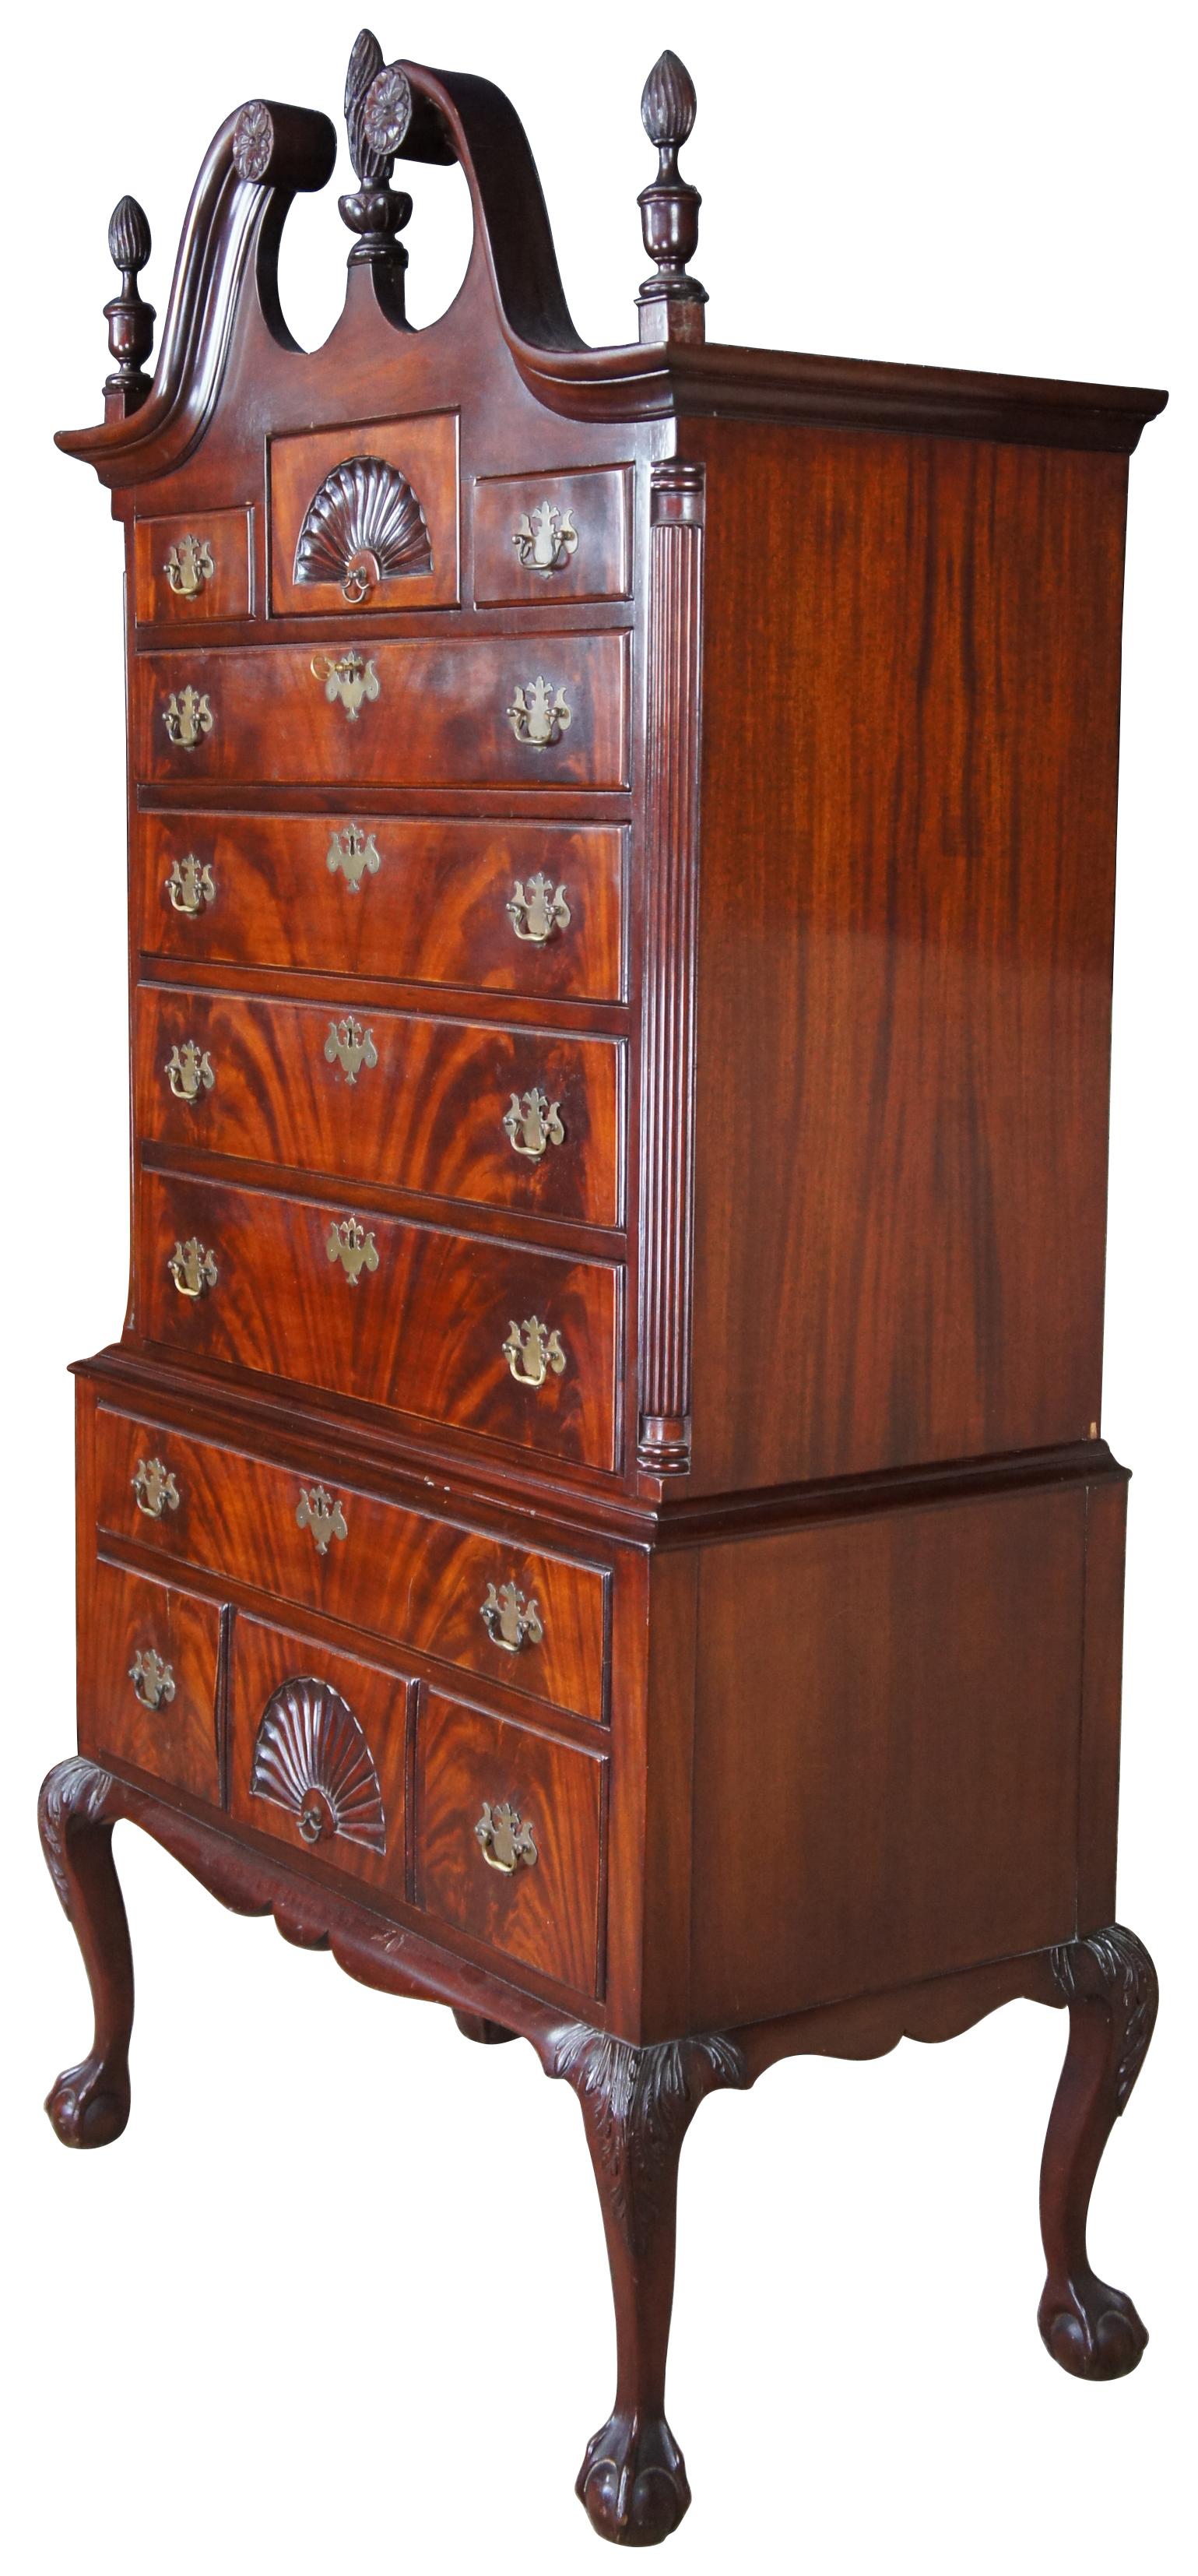 20th century Chippendale highboy dresser or chest. Made of flamed mahogany featuring a open pediment with torchiere finials, ten drawers and ball and claw feet. Measure: 81